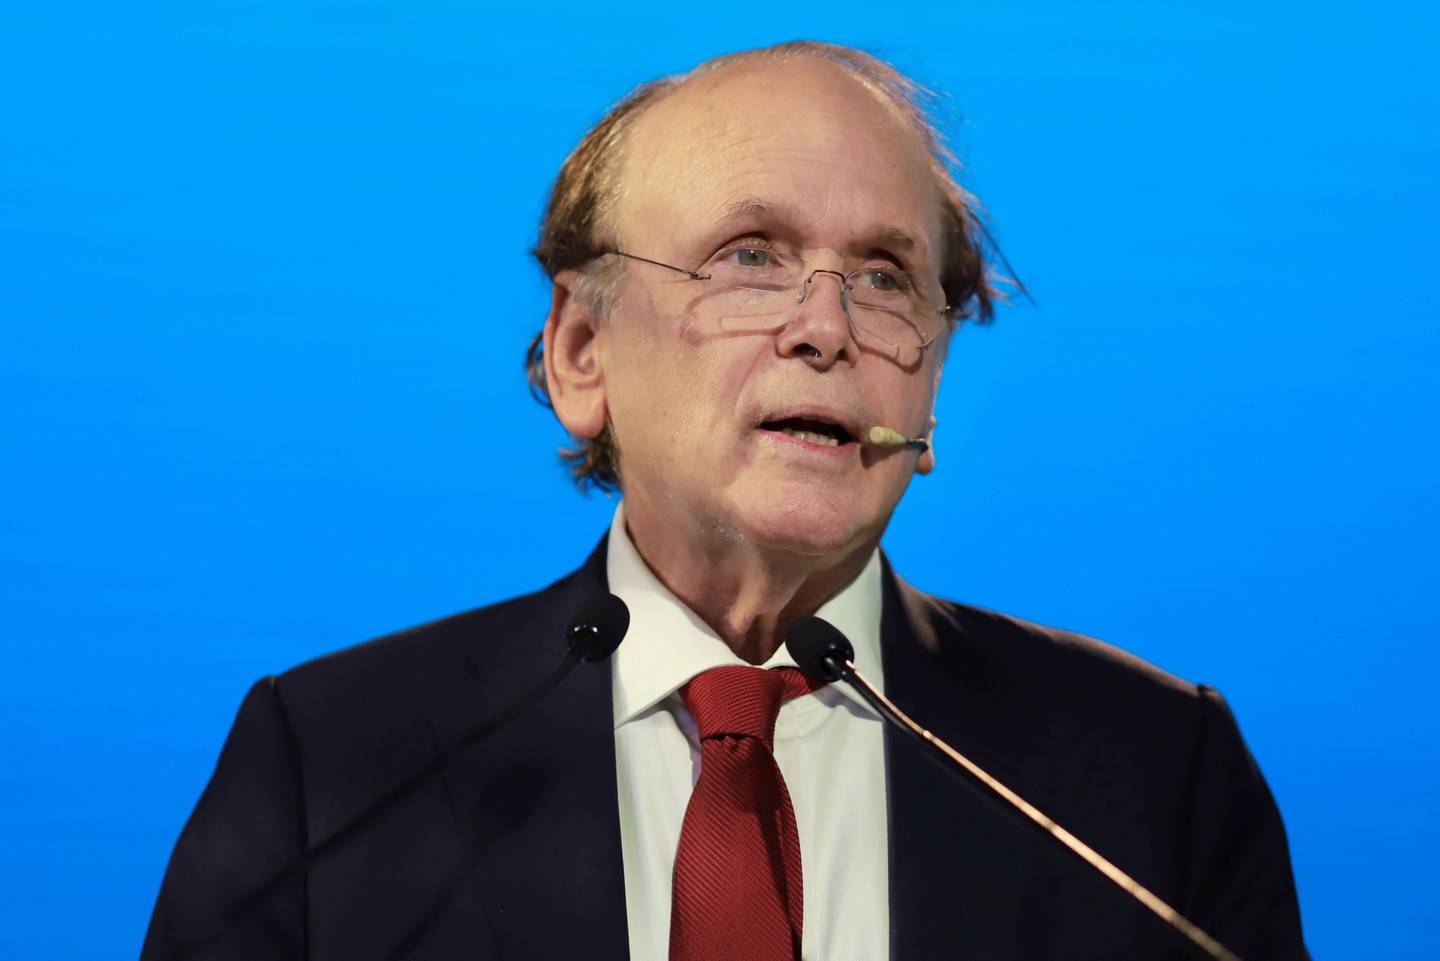 Daniel Yergin, vice chairman of IHS Markit Ltd., speaks during the India Energy Forum by Ceraweek in New Delhi, India, on Monday, Oct. 14, 2019. The conference provides insight into the Indian and regional energy future by addressing key issues from India's energy transition; provision of heat, light and mobility; sustainability; expanding use and game-changing industry technologies.dfd